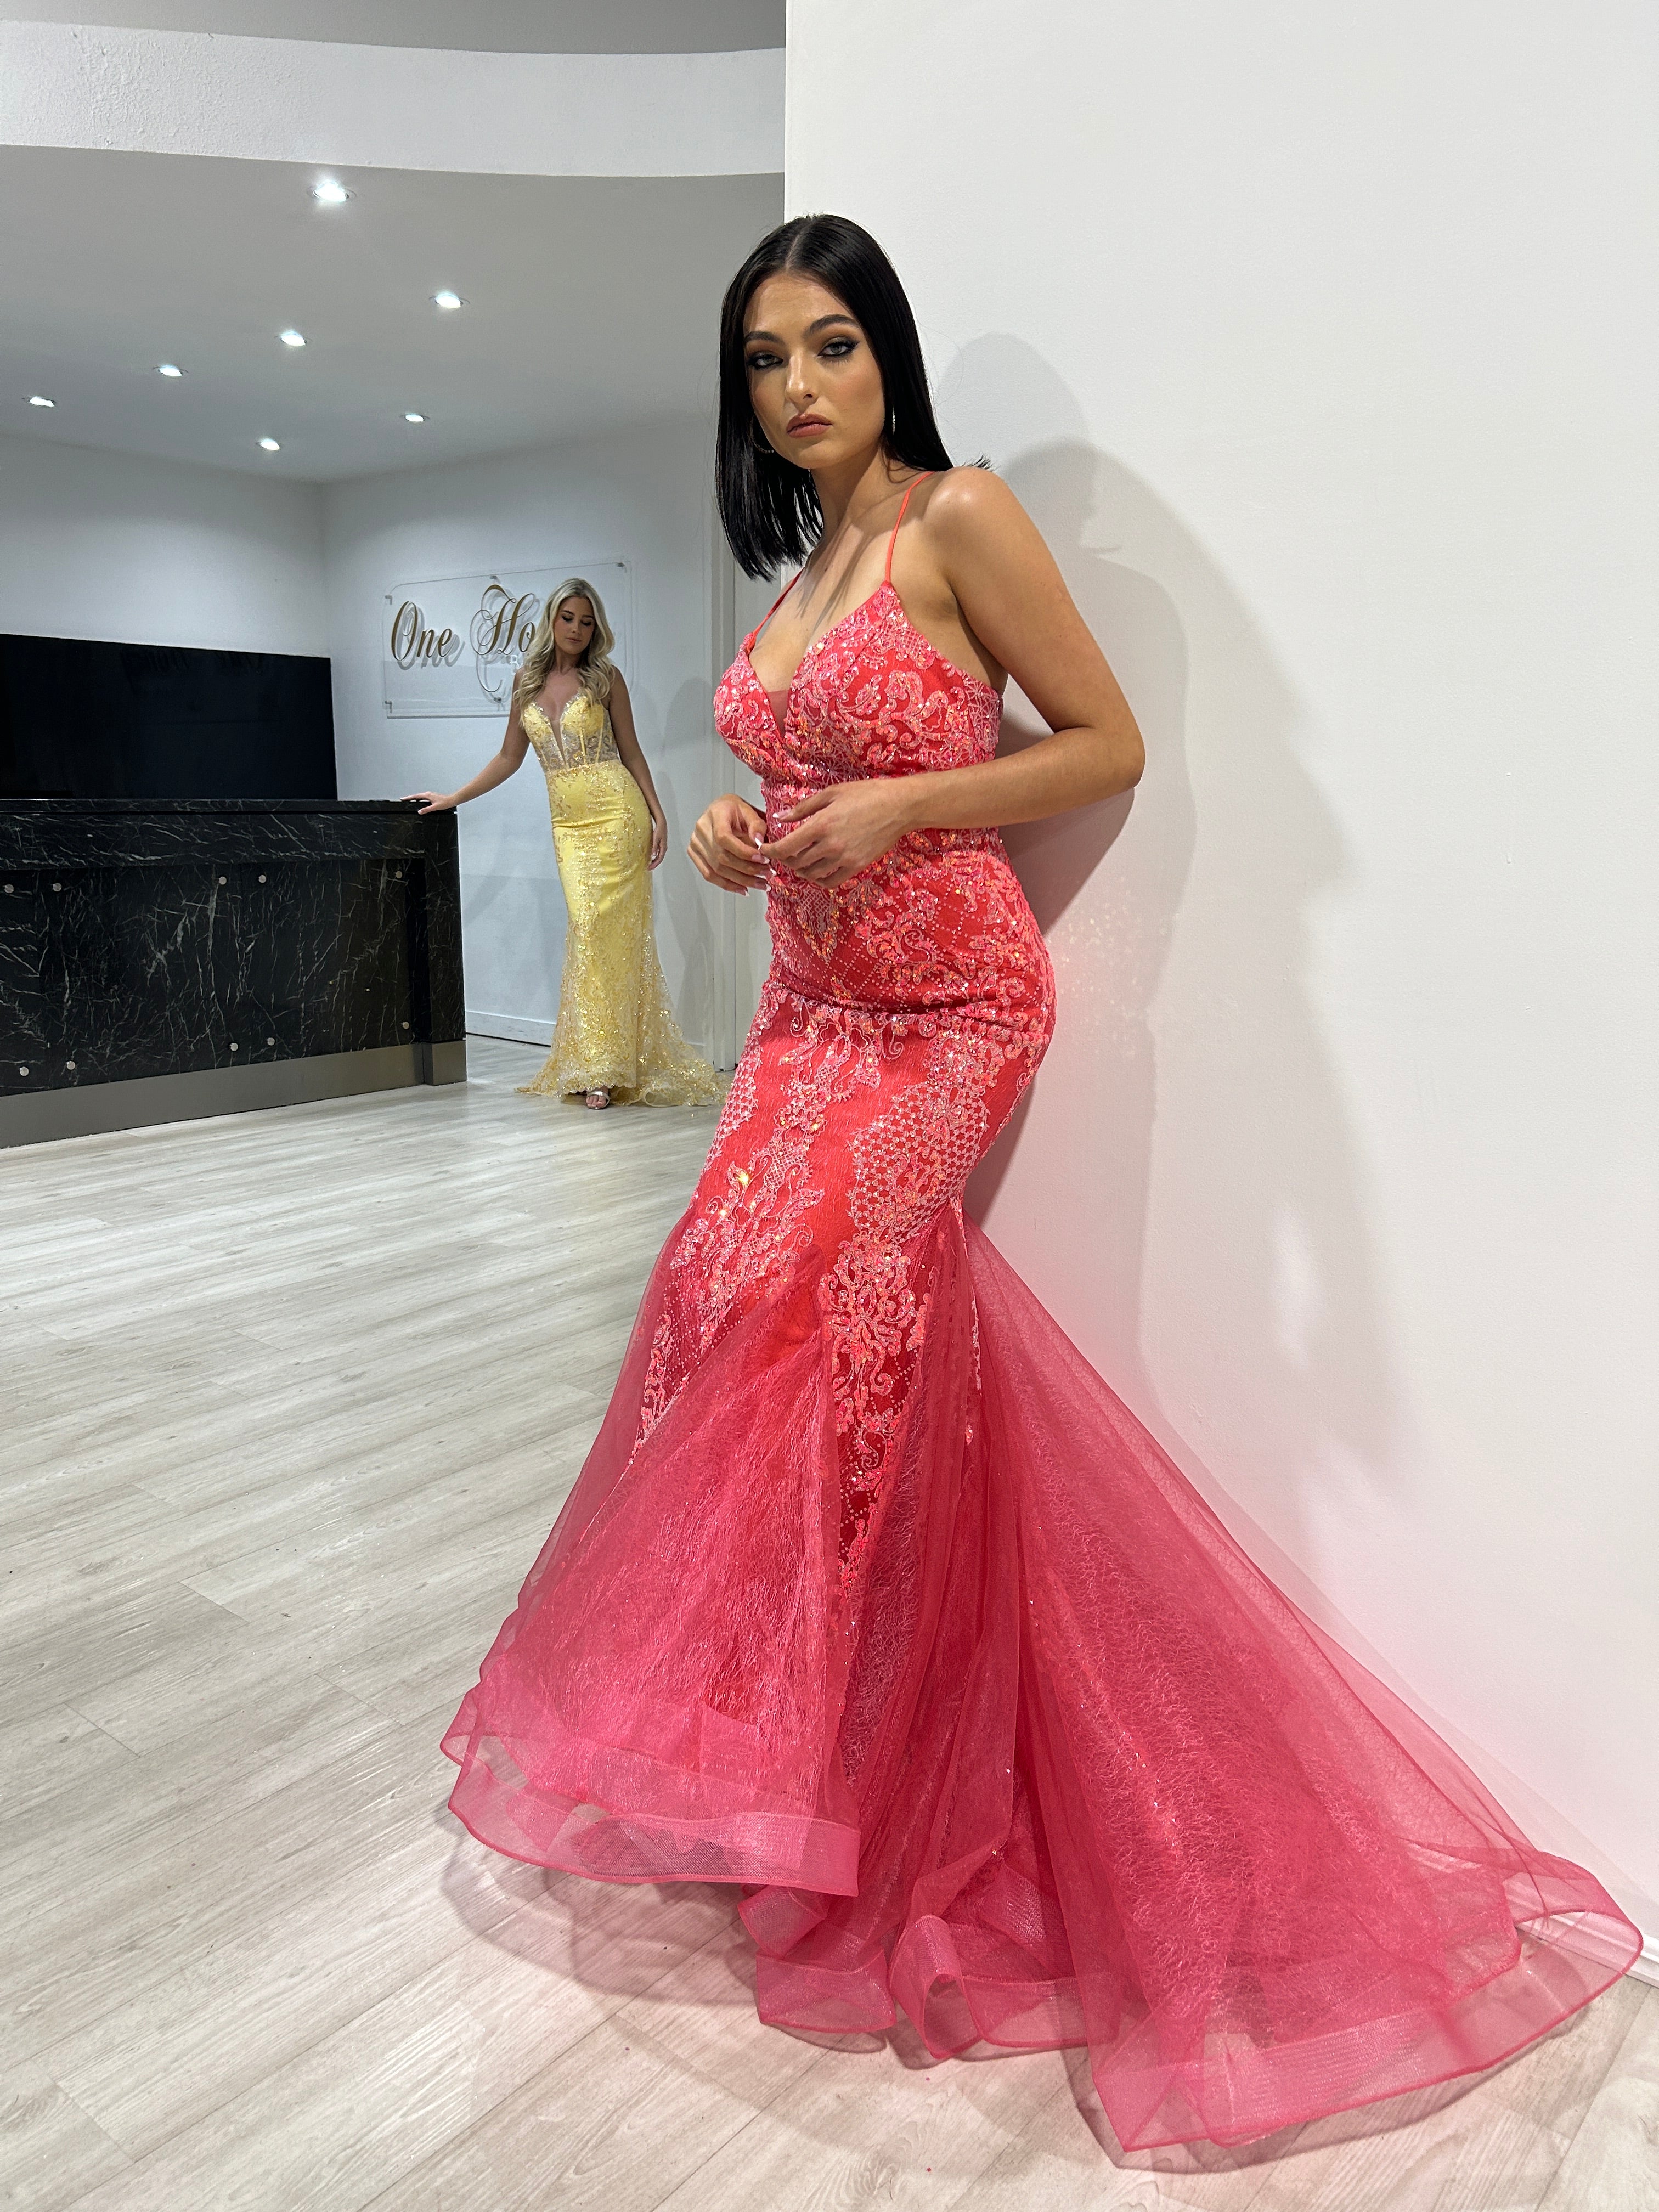 Honey Couture SHAYLA Coral Sequin Glitter Fishtail Mermaid Formal Dress